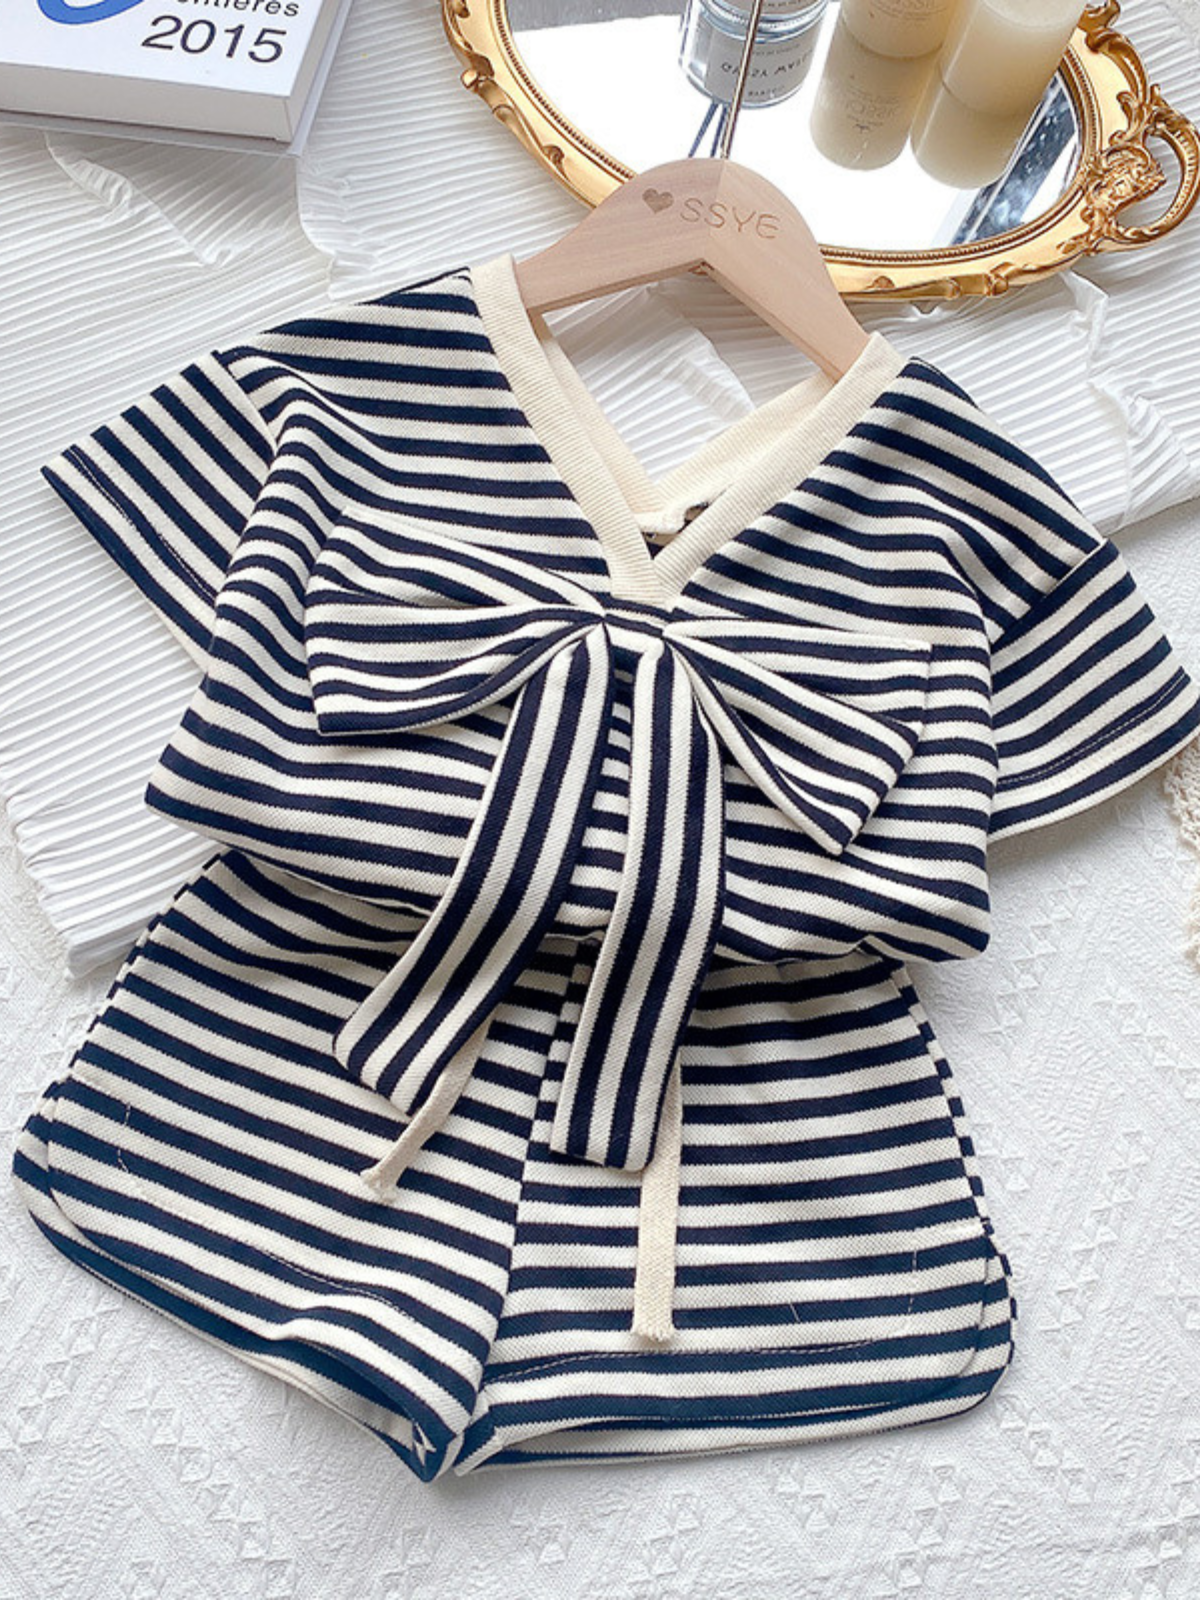 Girls Summer Outfits | Black Striped Statement Bow Top & Shorts Set